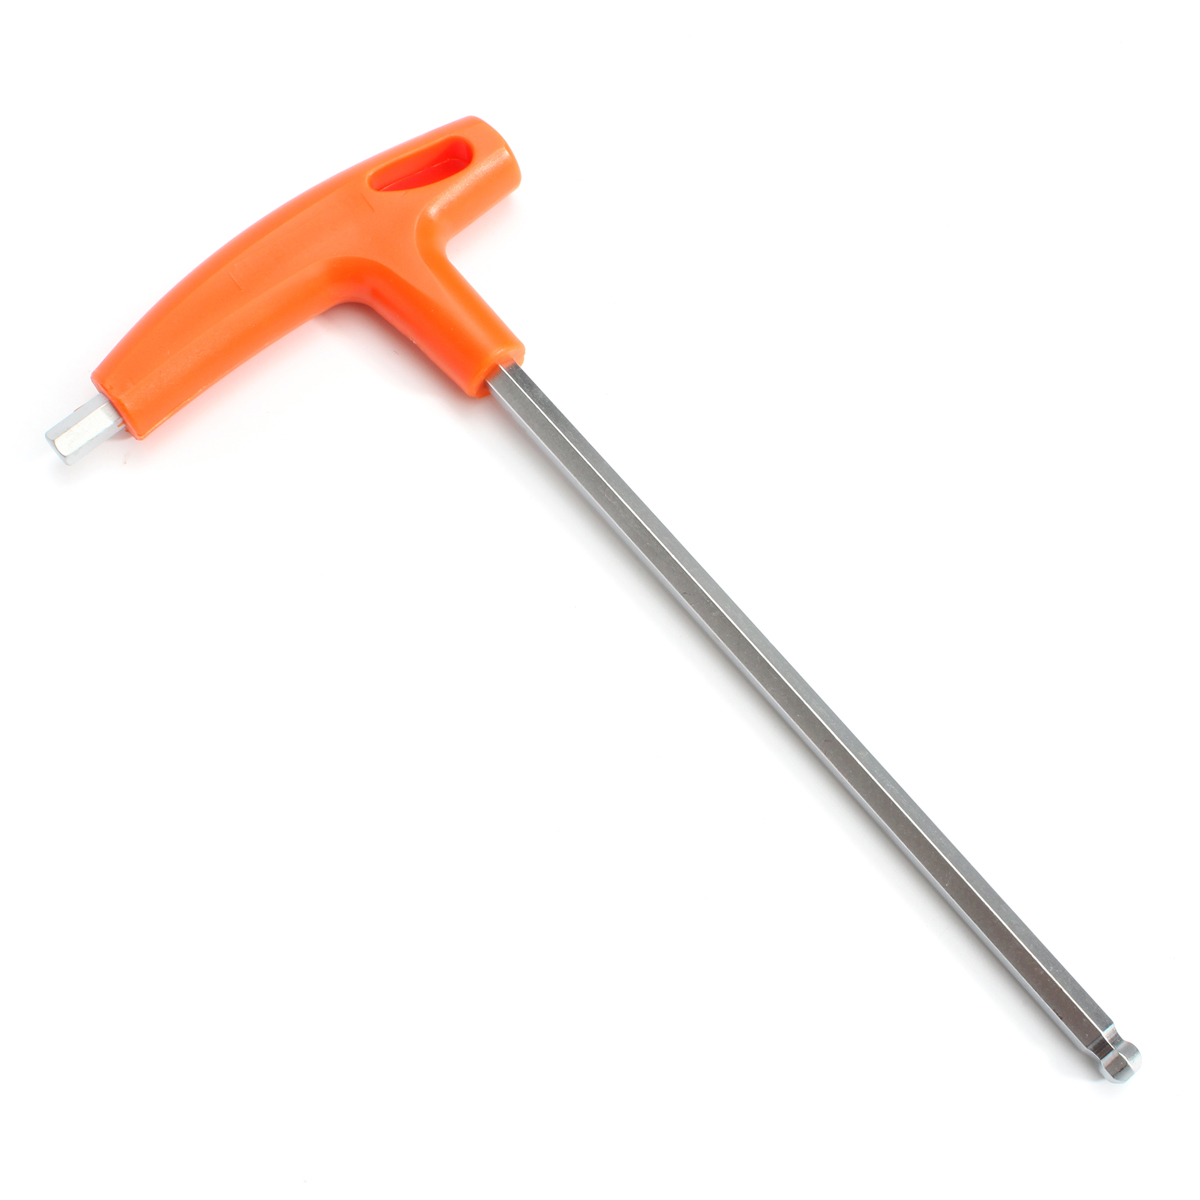 6Pcs-T-Handle-Ball-Ended-Hex-Key-Set-Long-Reach-Allen-Screwdriver-Wrench-Tool-2253568mm-1067679